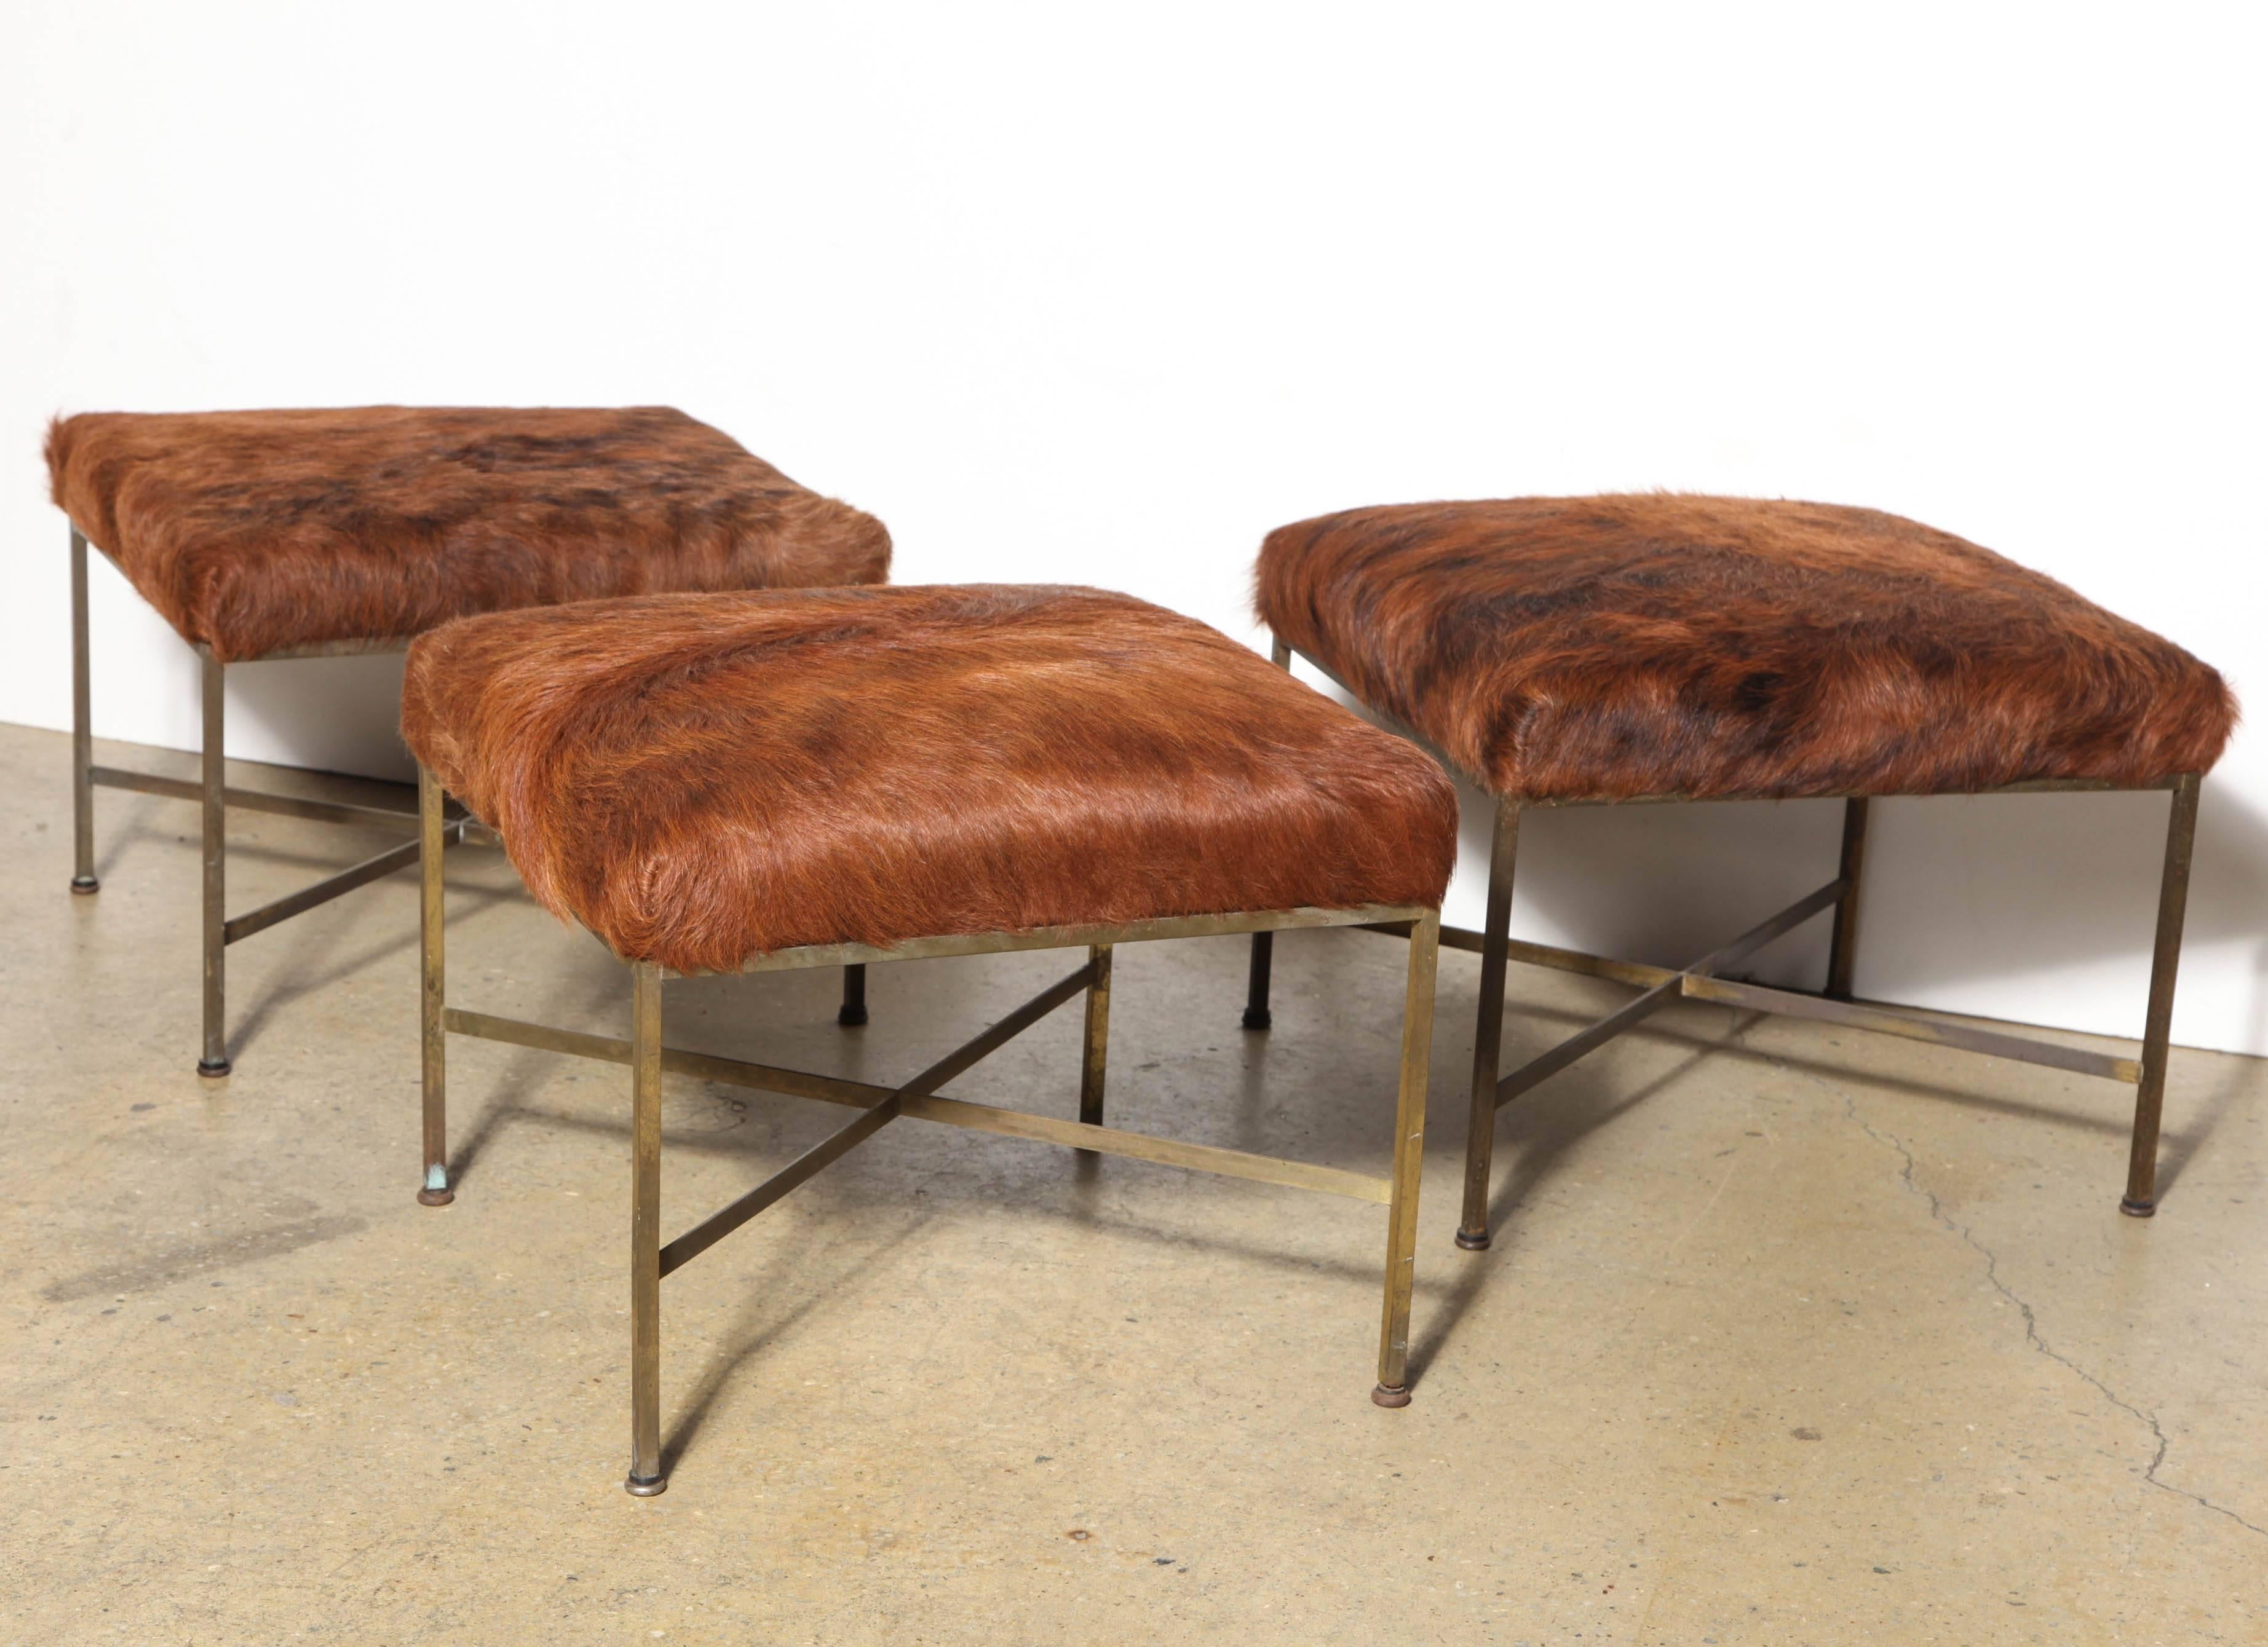 Set of 3 Paul McCobb for Directional Brass Cross Frame Occasional Stools, 1956 designed. Featuring classic Brass square seat, X base and tubular legs. Original condition with old Bronze patina. Upholstered in Cowhide. Western. Versatile. Repurpose.